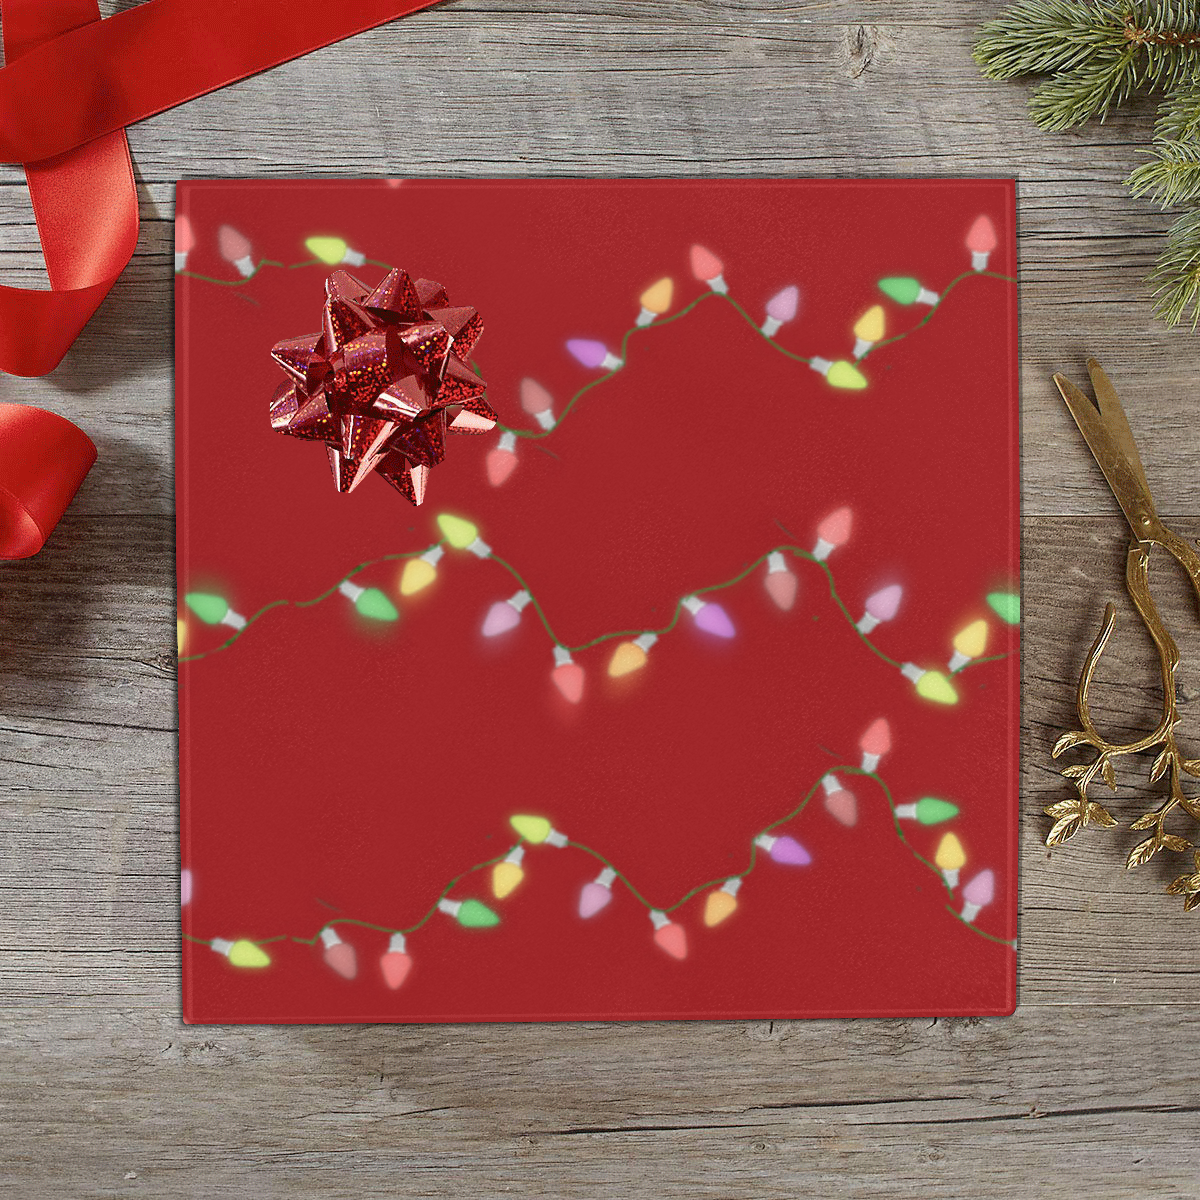 Festive Christmas Lights  on Red Gift Wrapping Paper 58"x 23" (1 Roll)